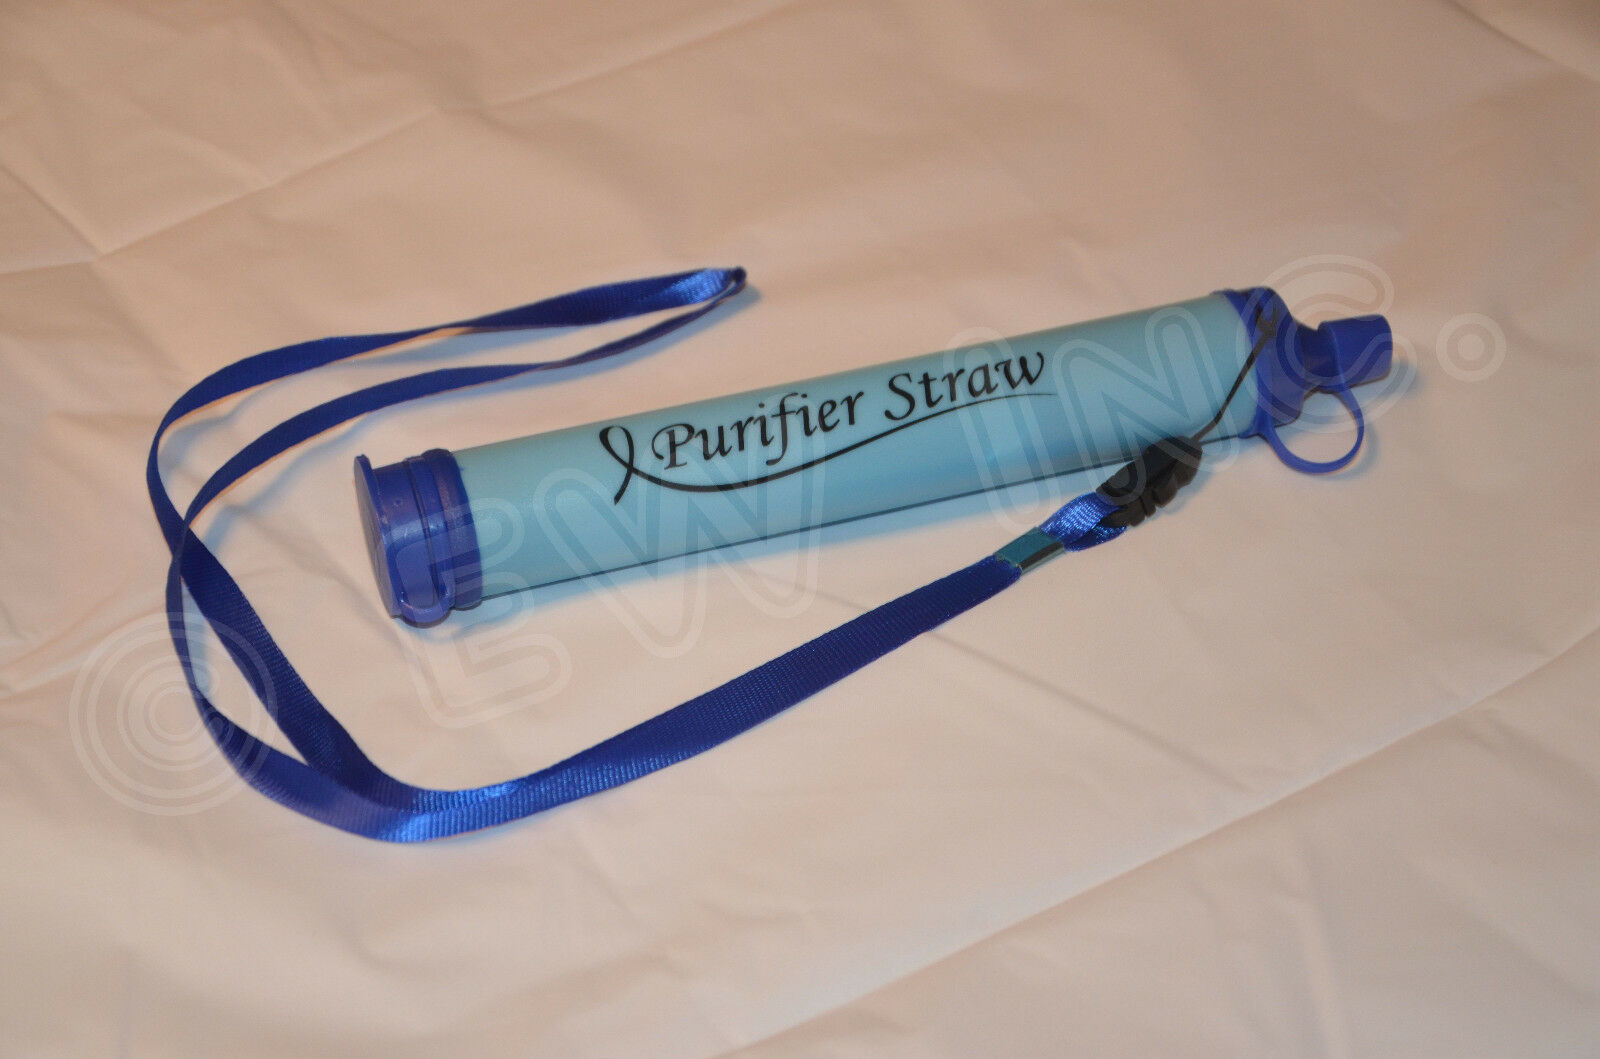 New Portable Personal Water Straw Filter Purifier For Outdoor Camping